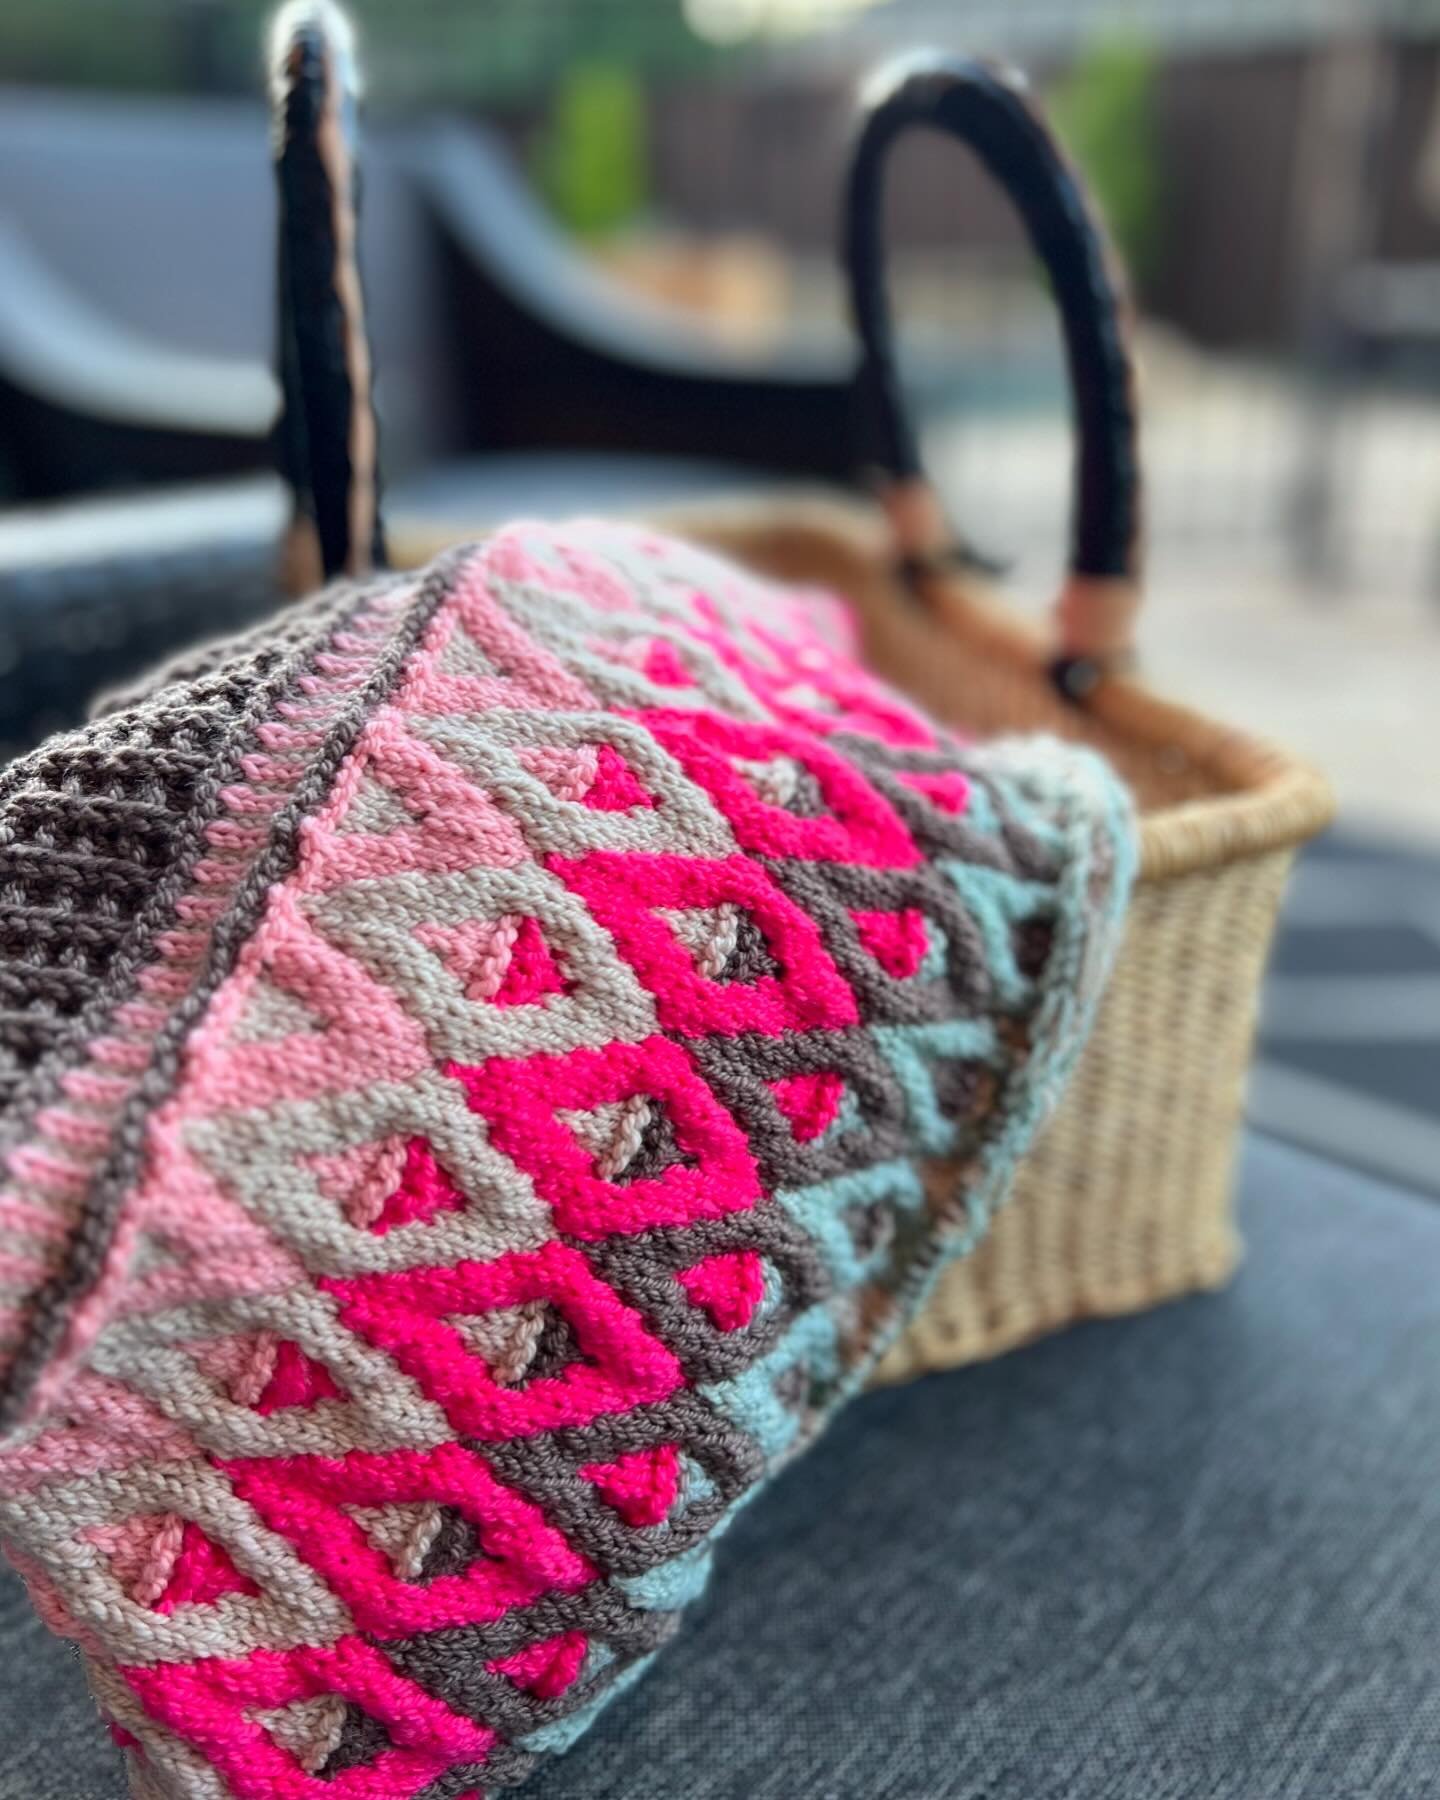 Some coffee-on-the-patio knitting! 🧶 Here in Texas we have to get out and enjoy the temps before summer sets in 😰😂

#mkartuskal #artusshawl #moonstruck_knits #pluckyknitter 

Our shop hours:
Monday-Thursday: 9:30am-8pm
Friday-Saturday: 9:30am-4pm
